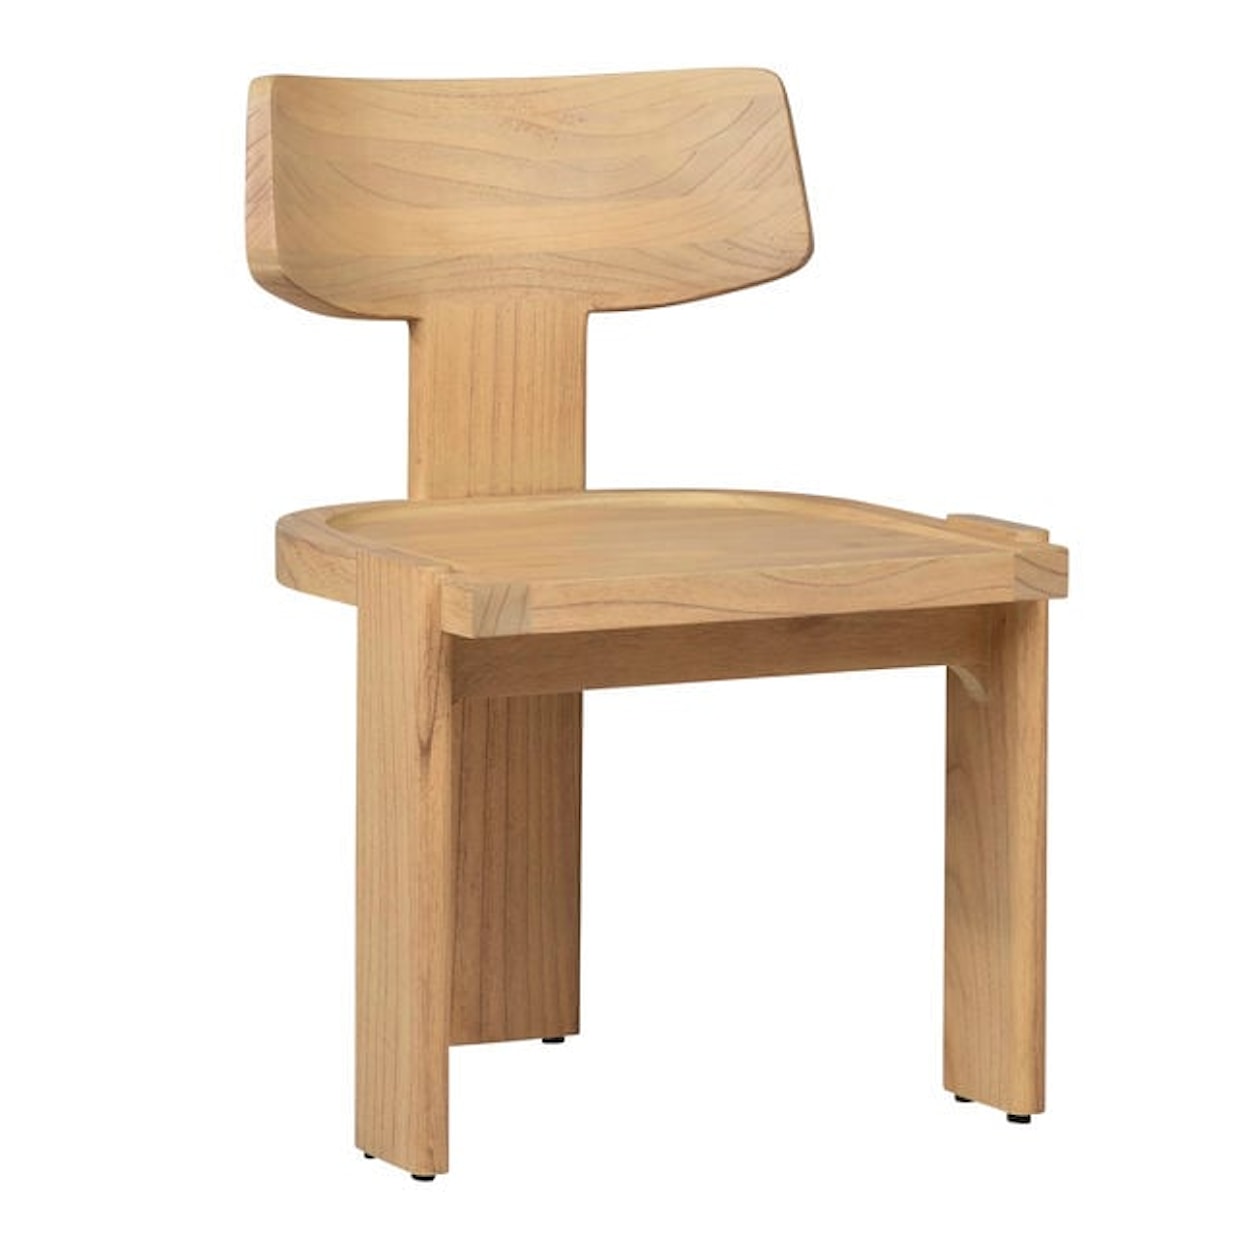 Dovetail Furniture Dining Chairs ARTEAGA DINING CHAIR- LIGHT NATURAL